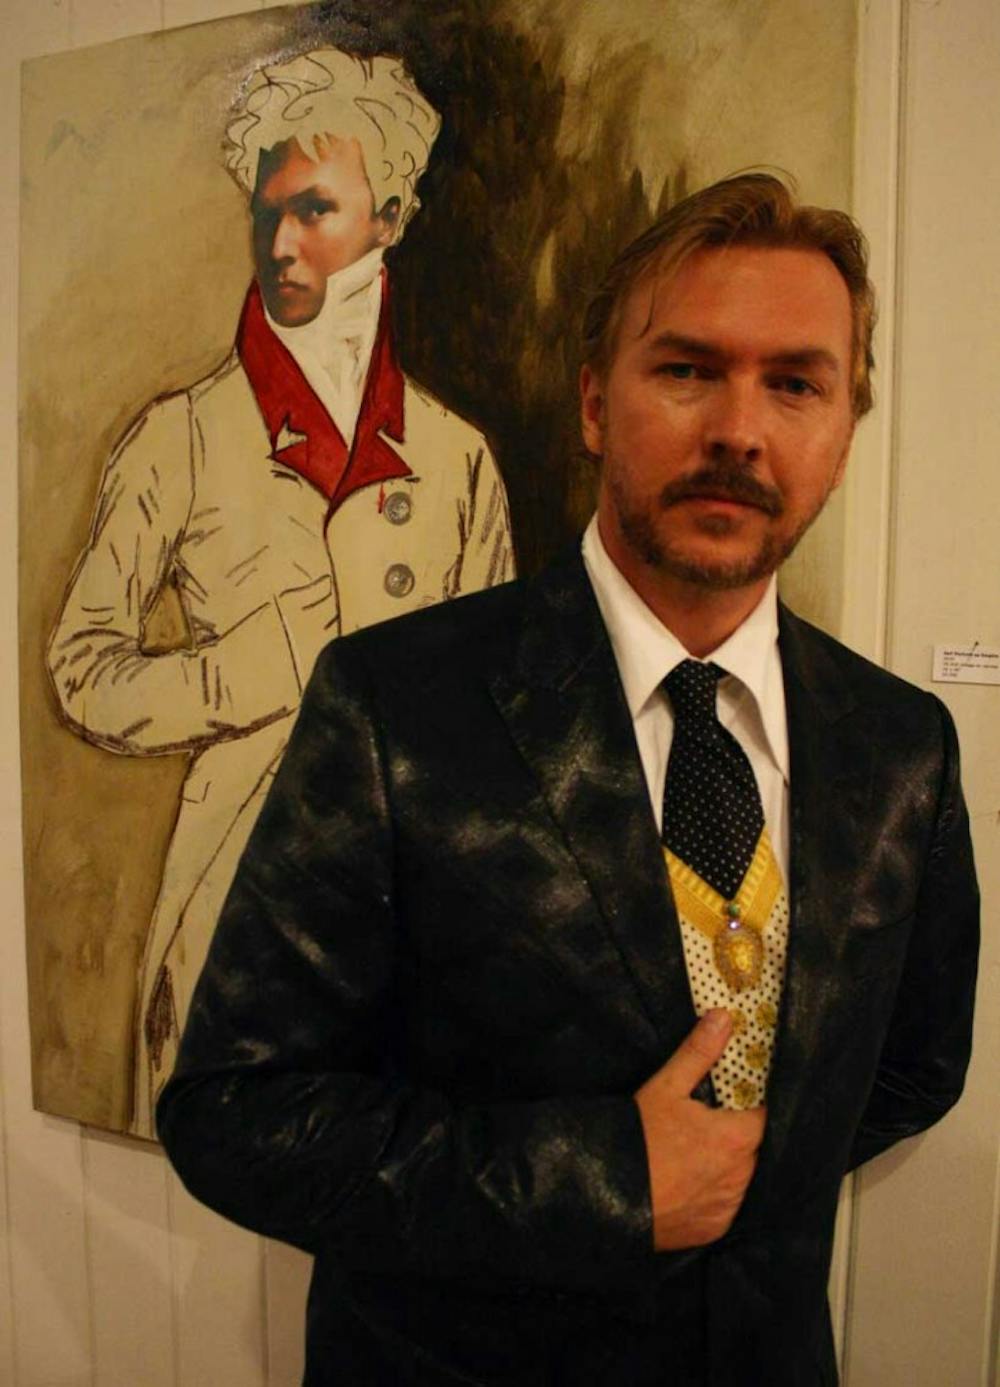 The artist Louis St. Lewis poses with a self-portrait in his gallery display at Toots &amp; Magoo.